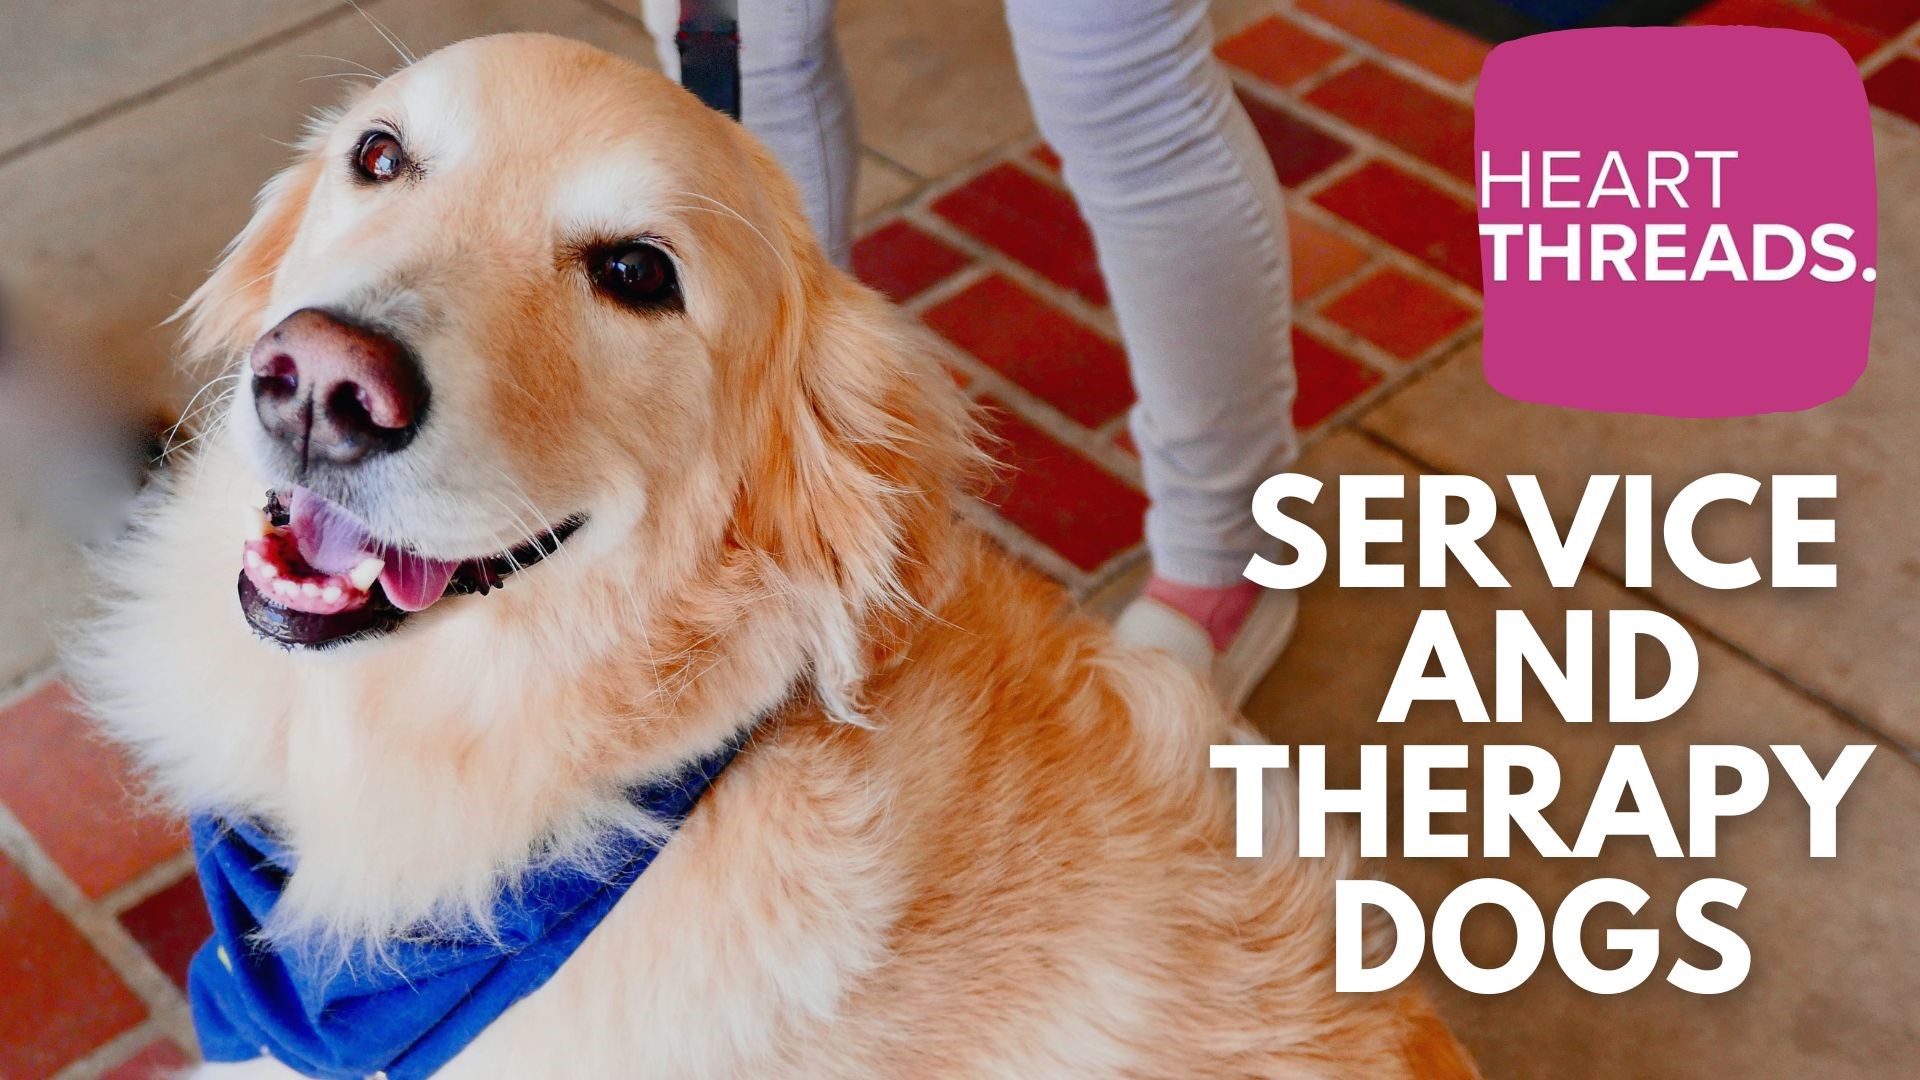 Stories focusing on the impact, love and support of service and therapy dogs. Heartwarming examples of how these dogs are doing their best to help people.